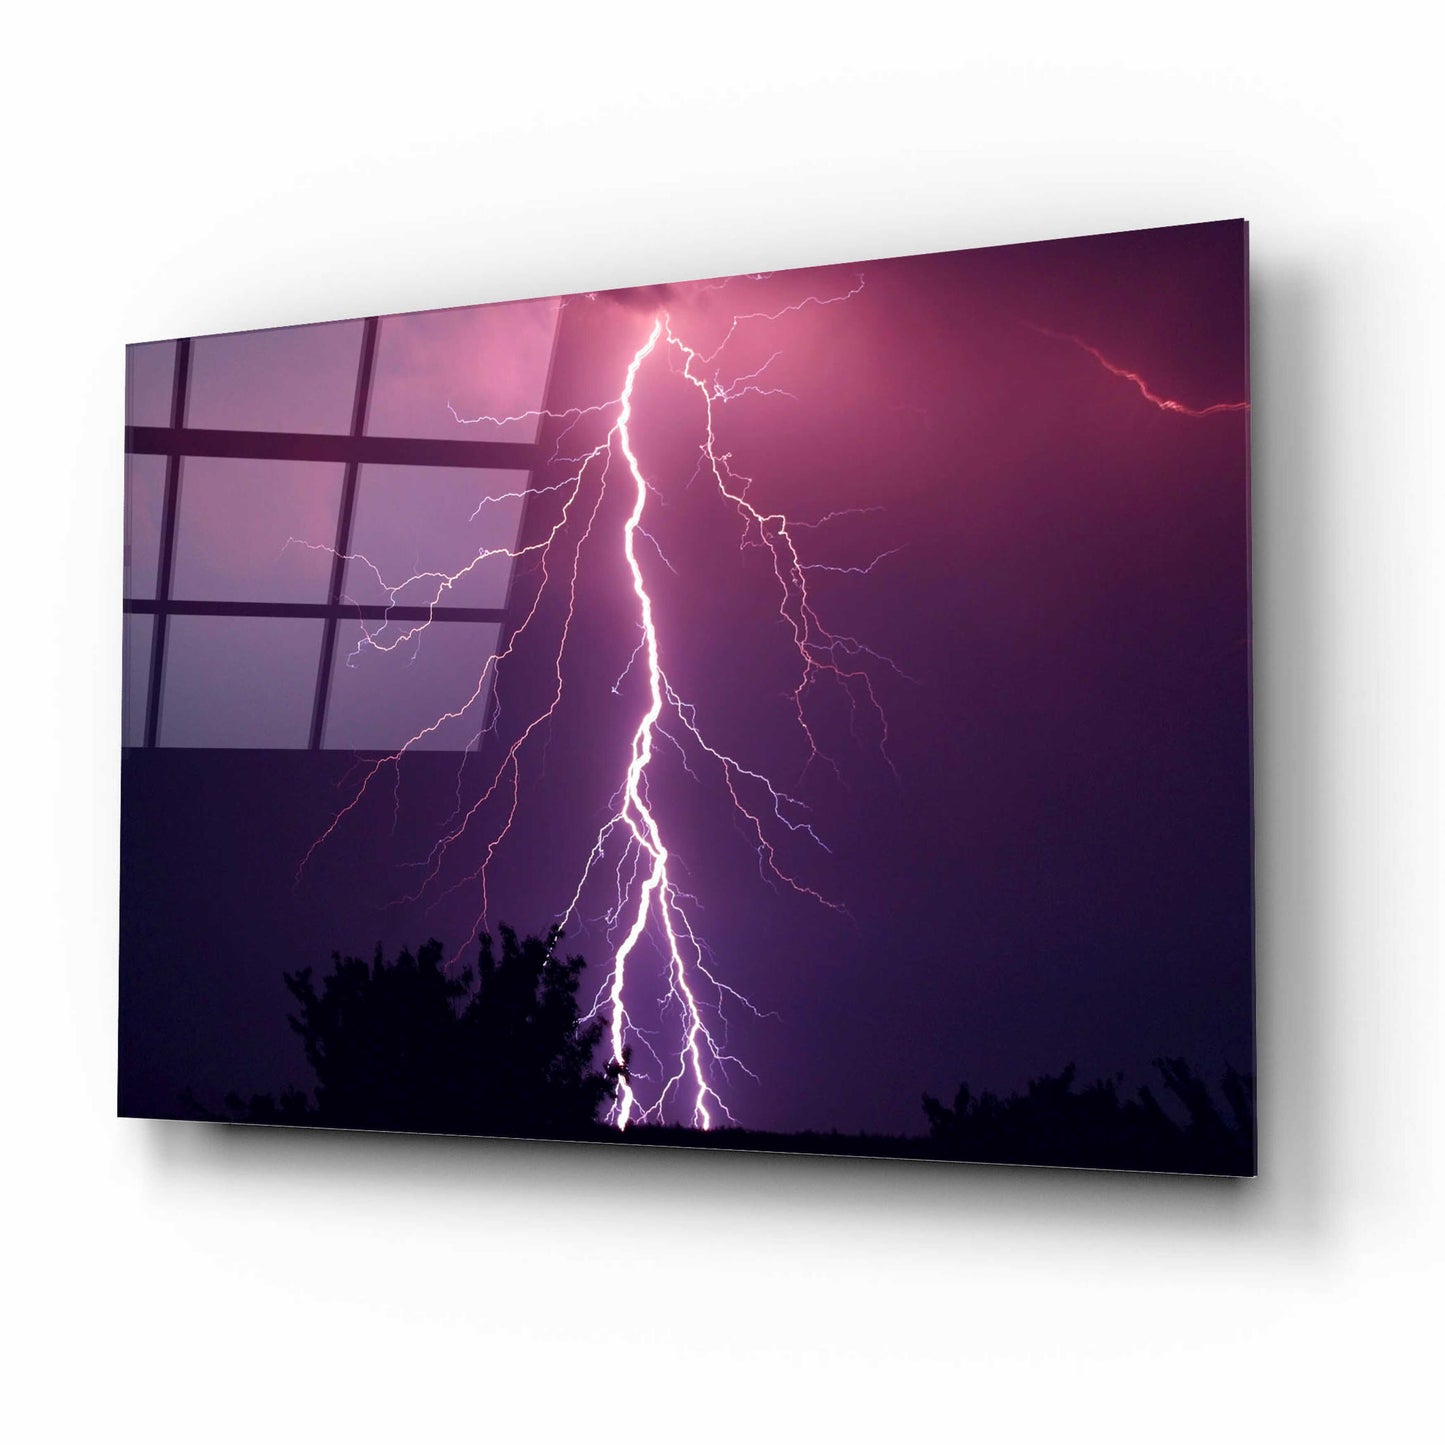 Epic Art 'Thunder' by Unknown Artist, Acrylic Glass Wall Art,16x12